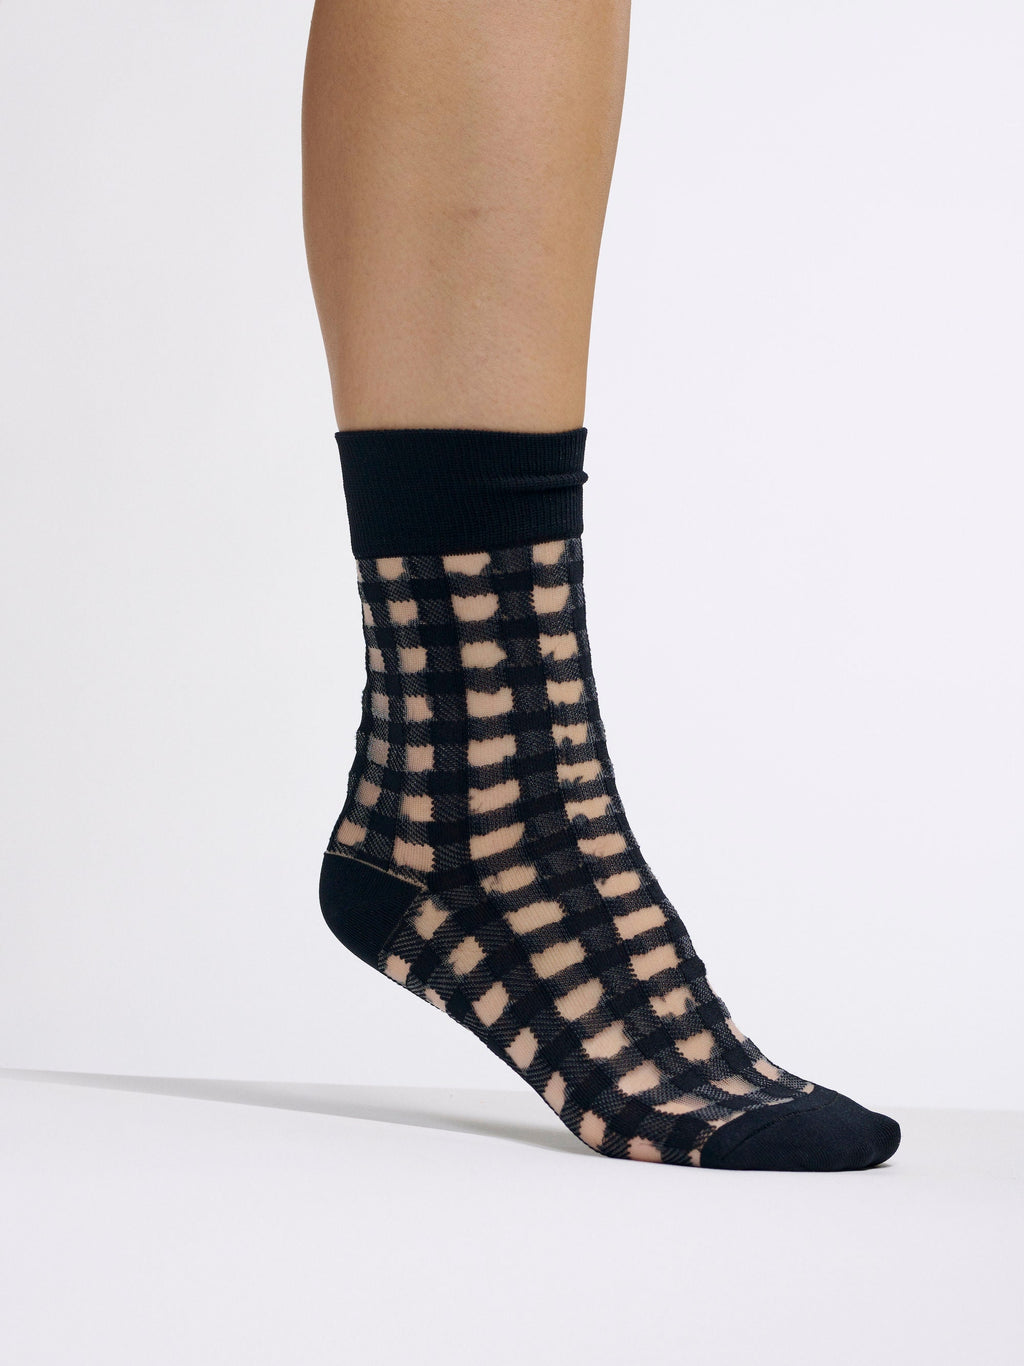 The Semi Sheer Gingham Socks | Black and Clear | Half Cutout Invisible Thread Socks in Black Plaid Grid Pattern | Goose Taffy